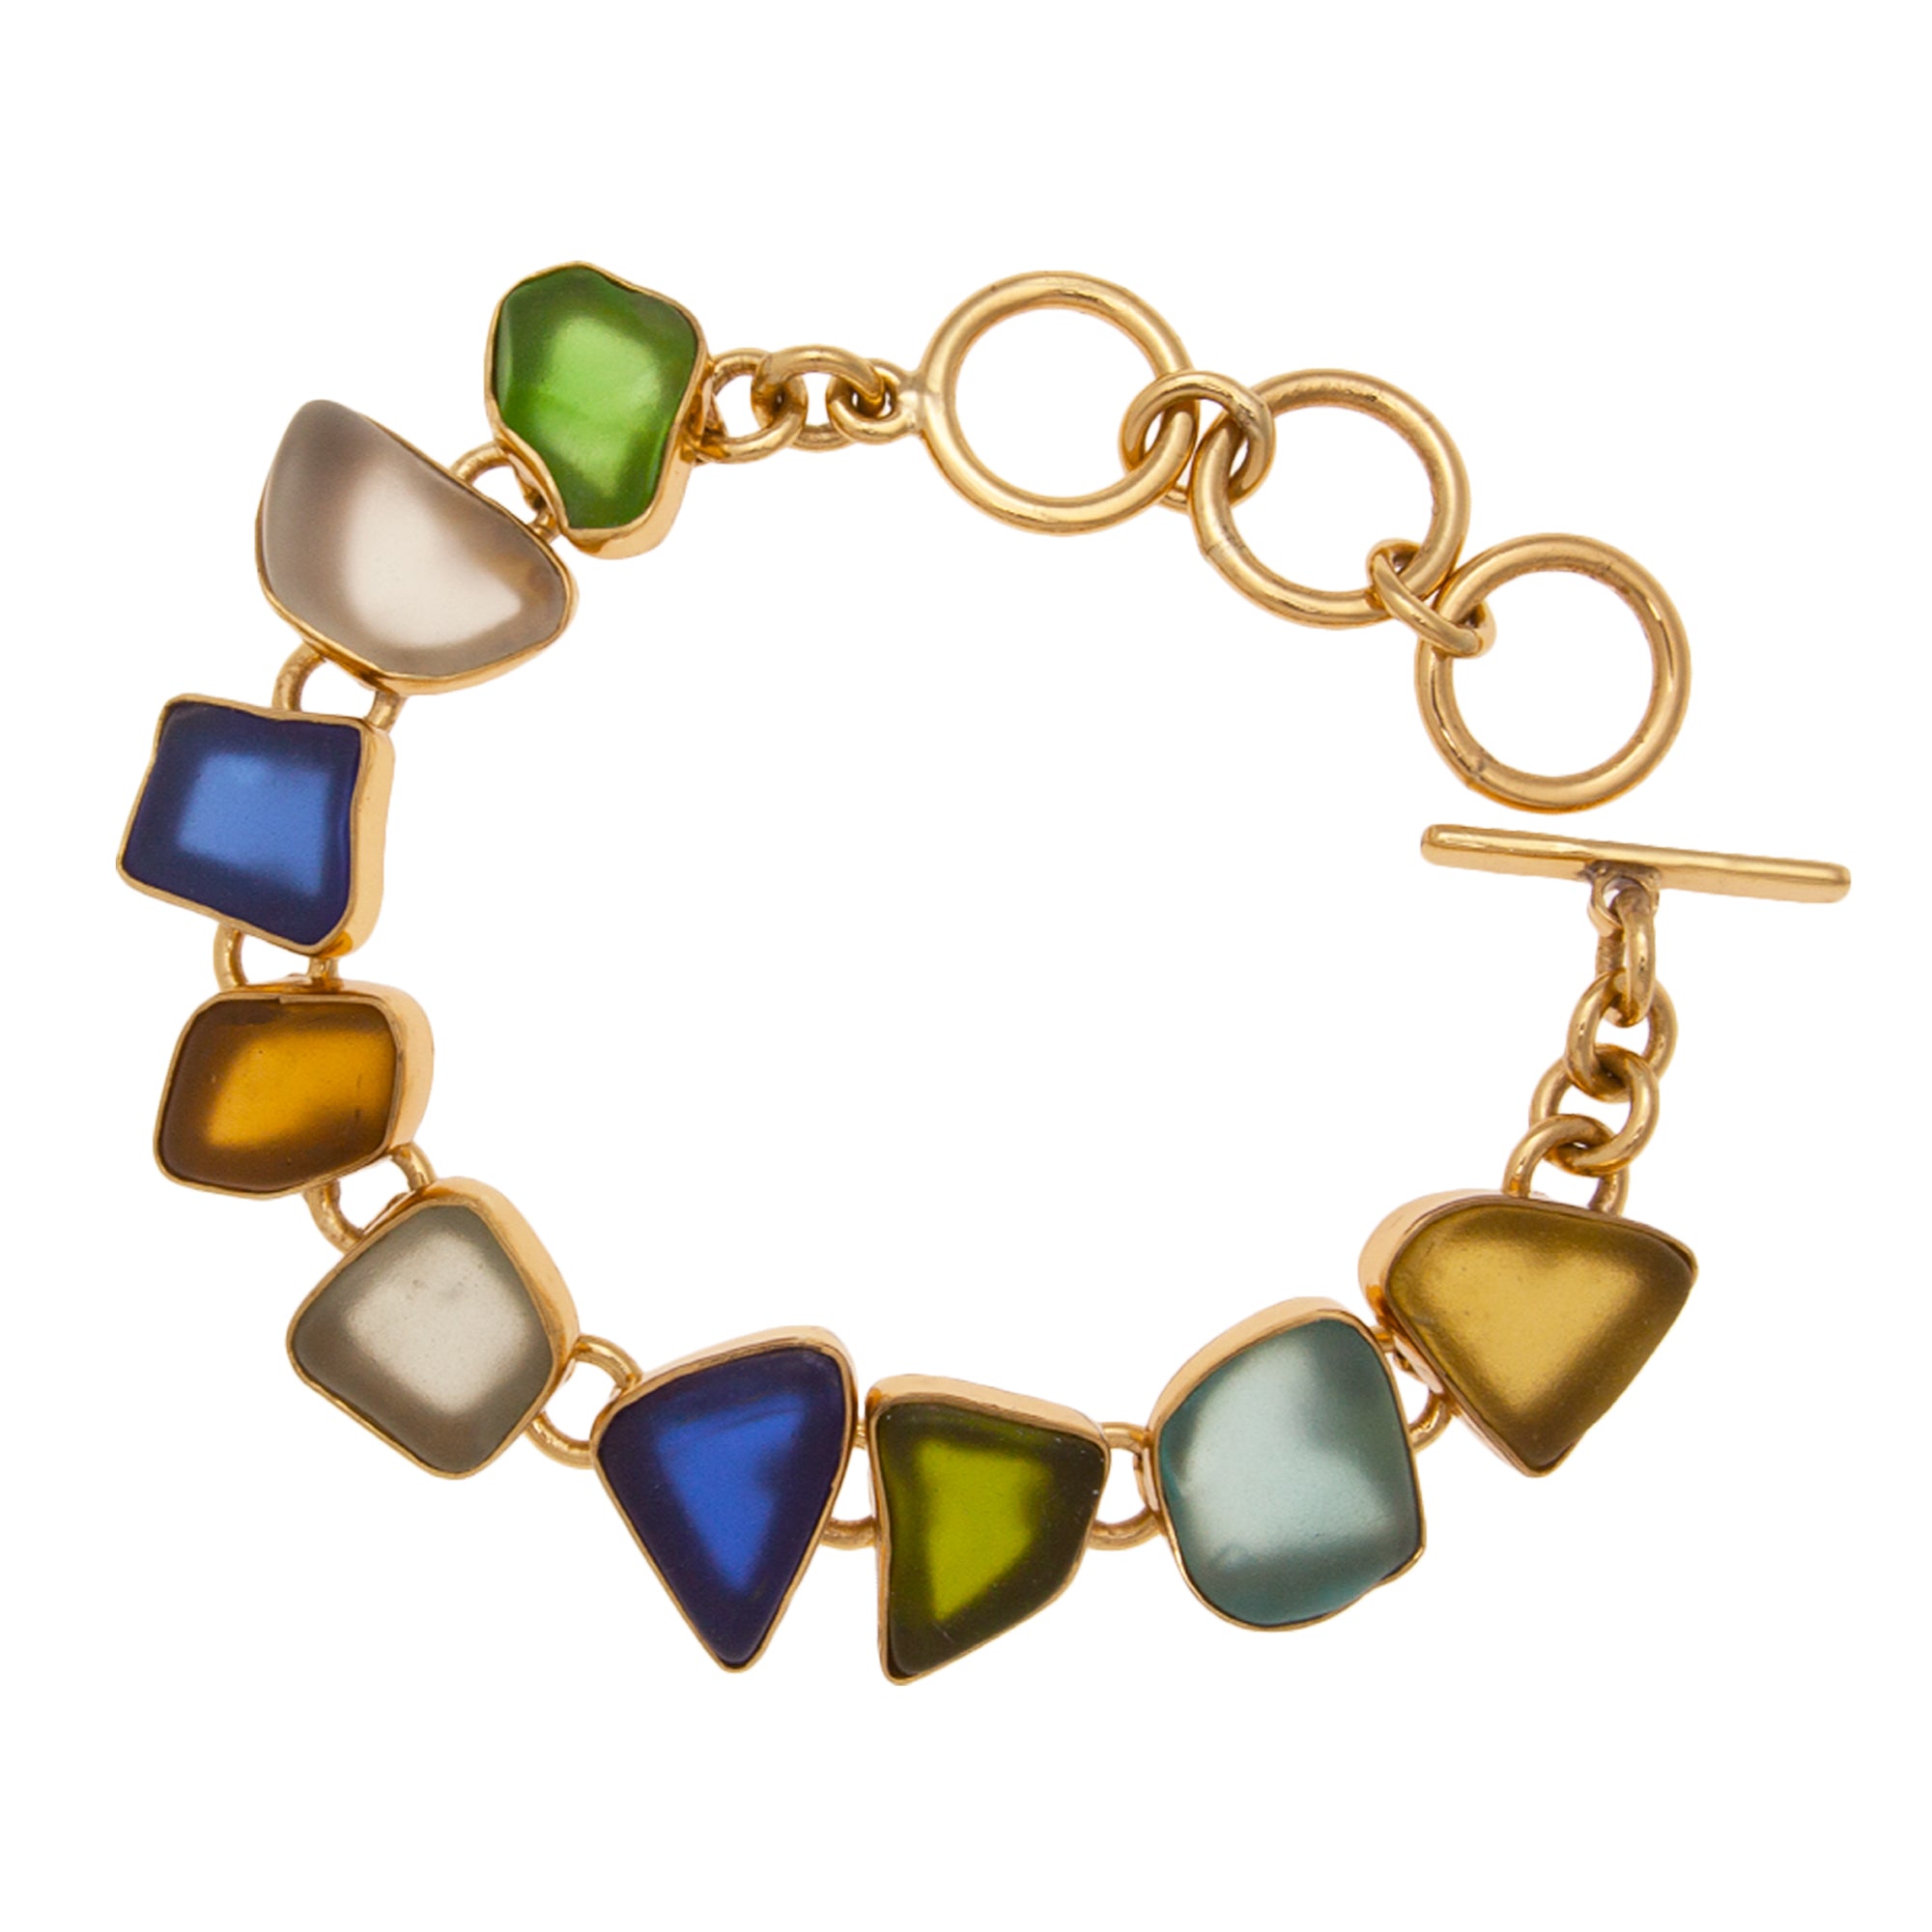 Alchemia Multi Color Recycled Glass Bracelet | Charles Albert Jewelry ...